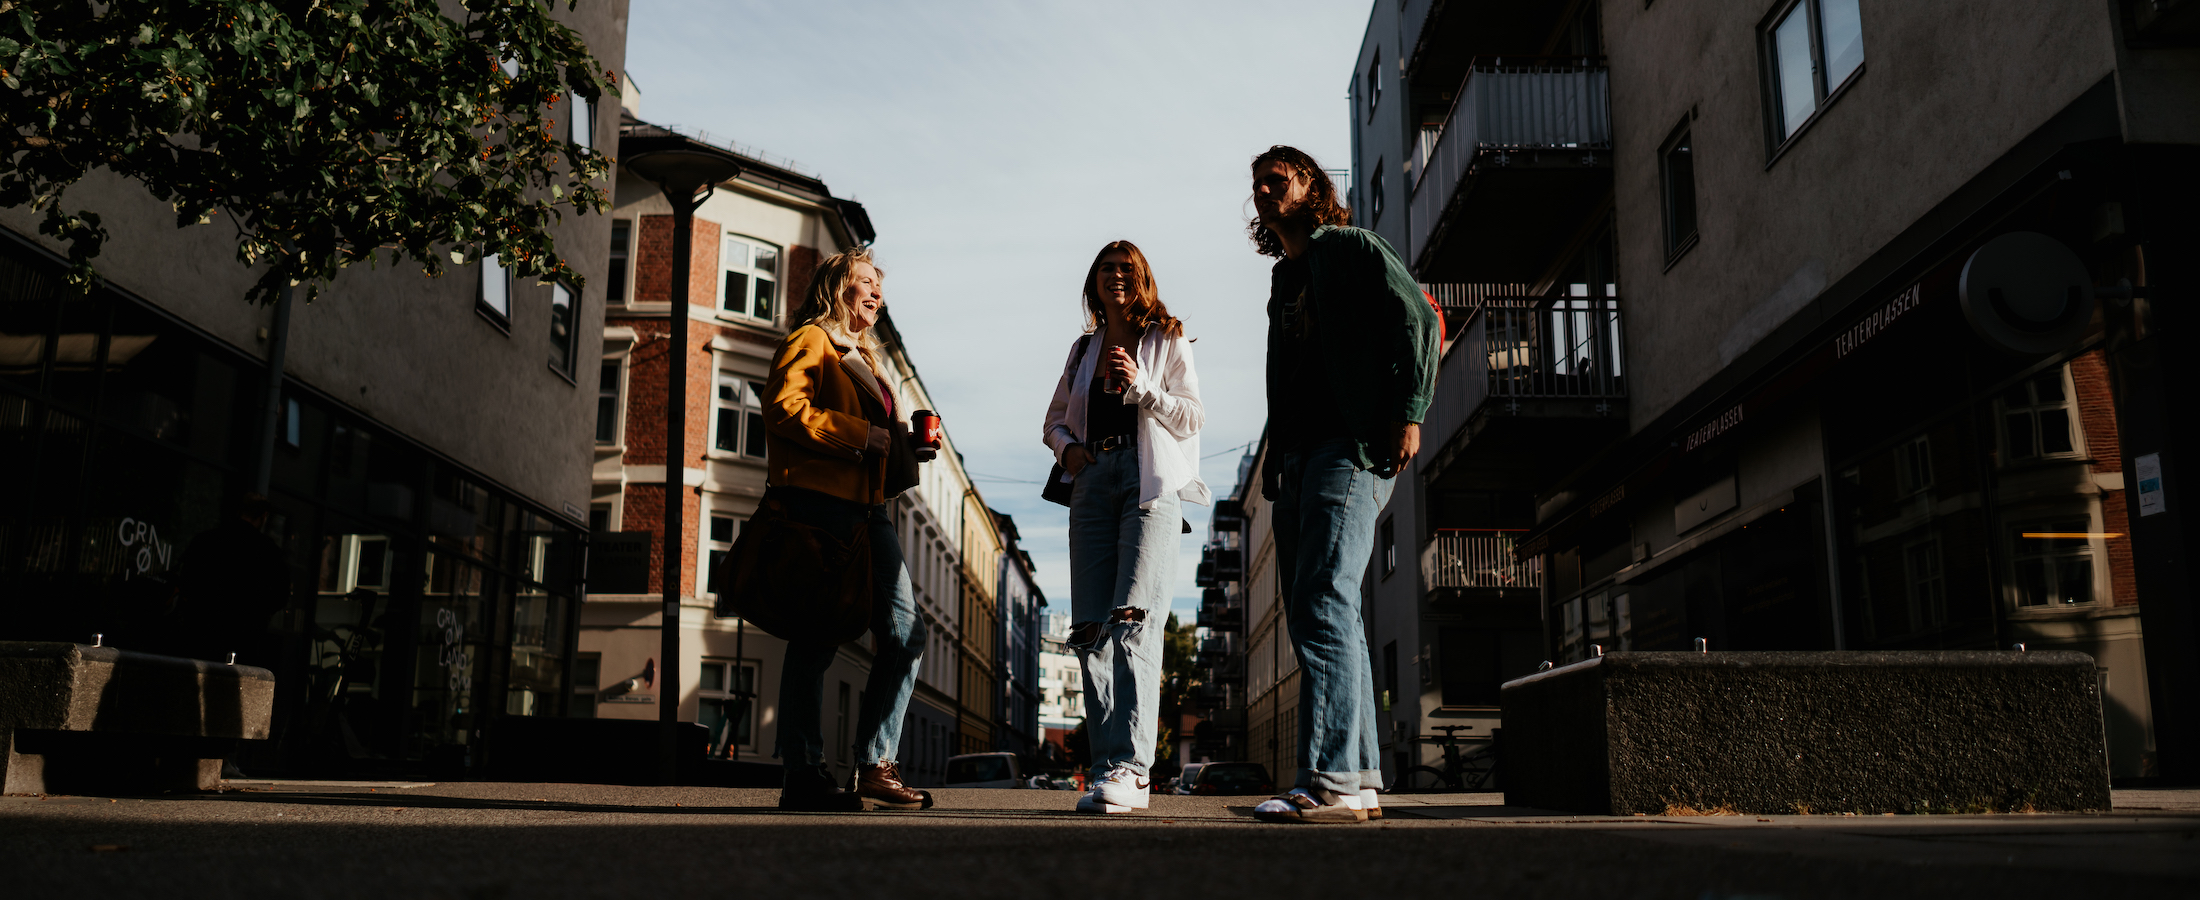 Three students chatting in a street in Oslo